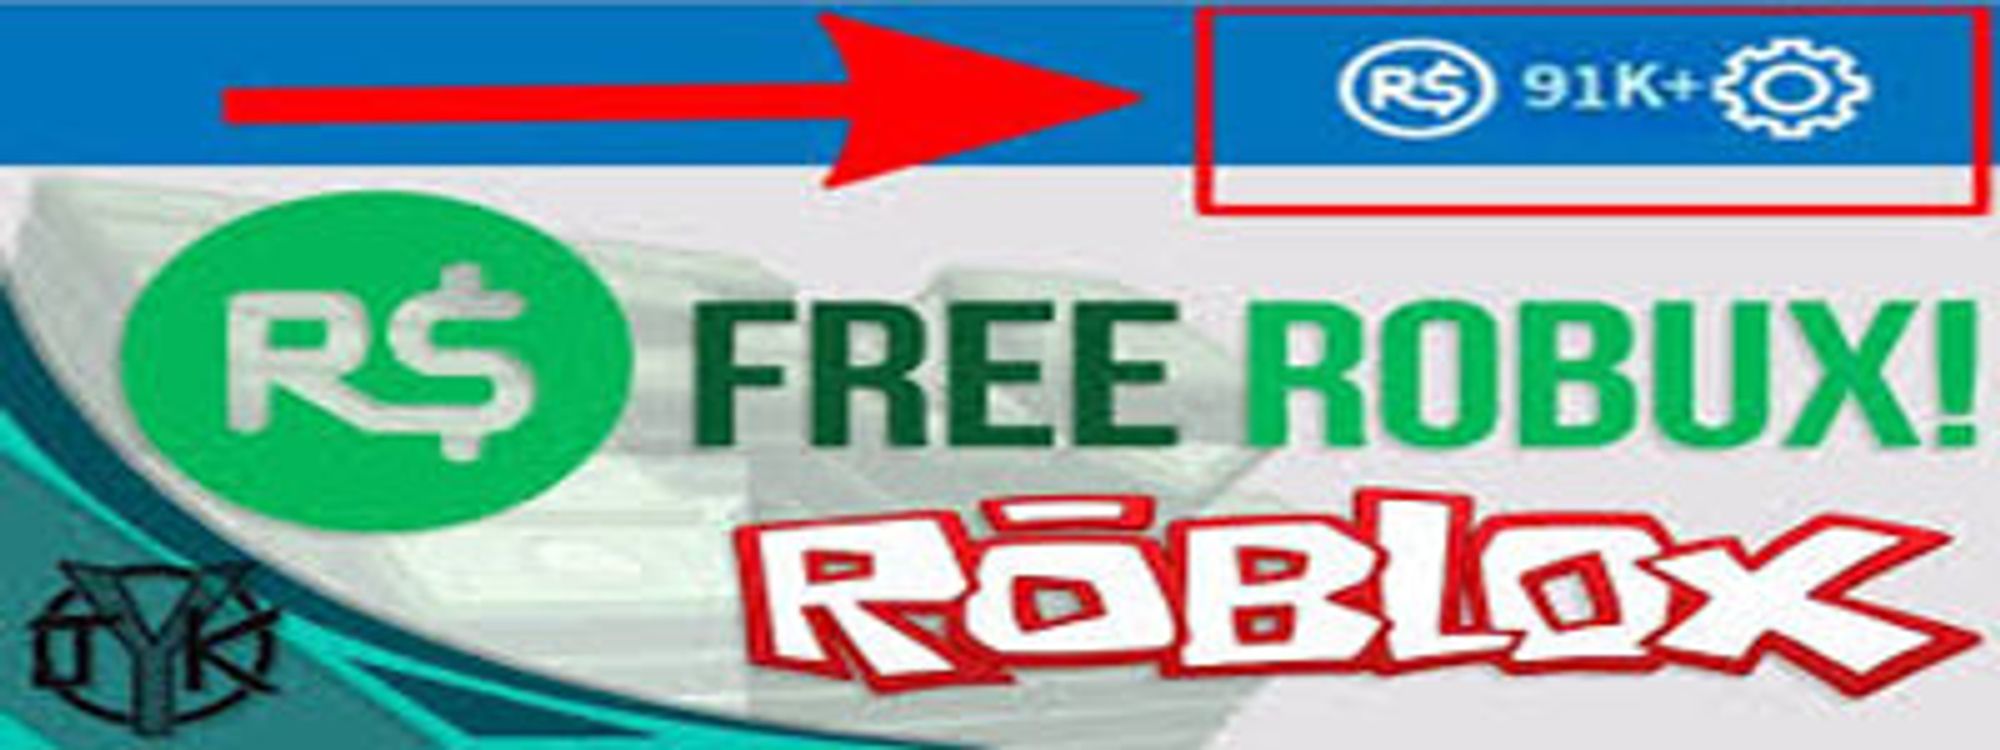 Roblox Robux Free Roblox Robux Codes With Skins Password Account 2020 - robux geneator no loging or password needed